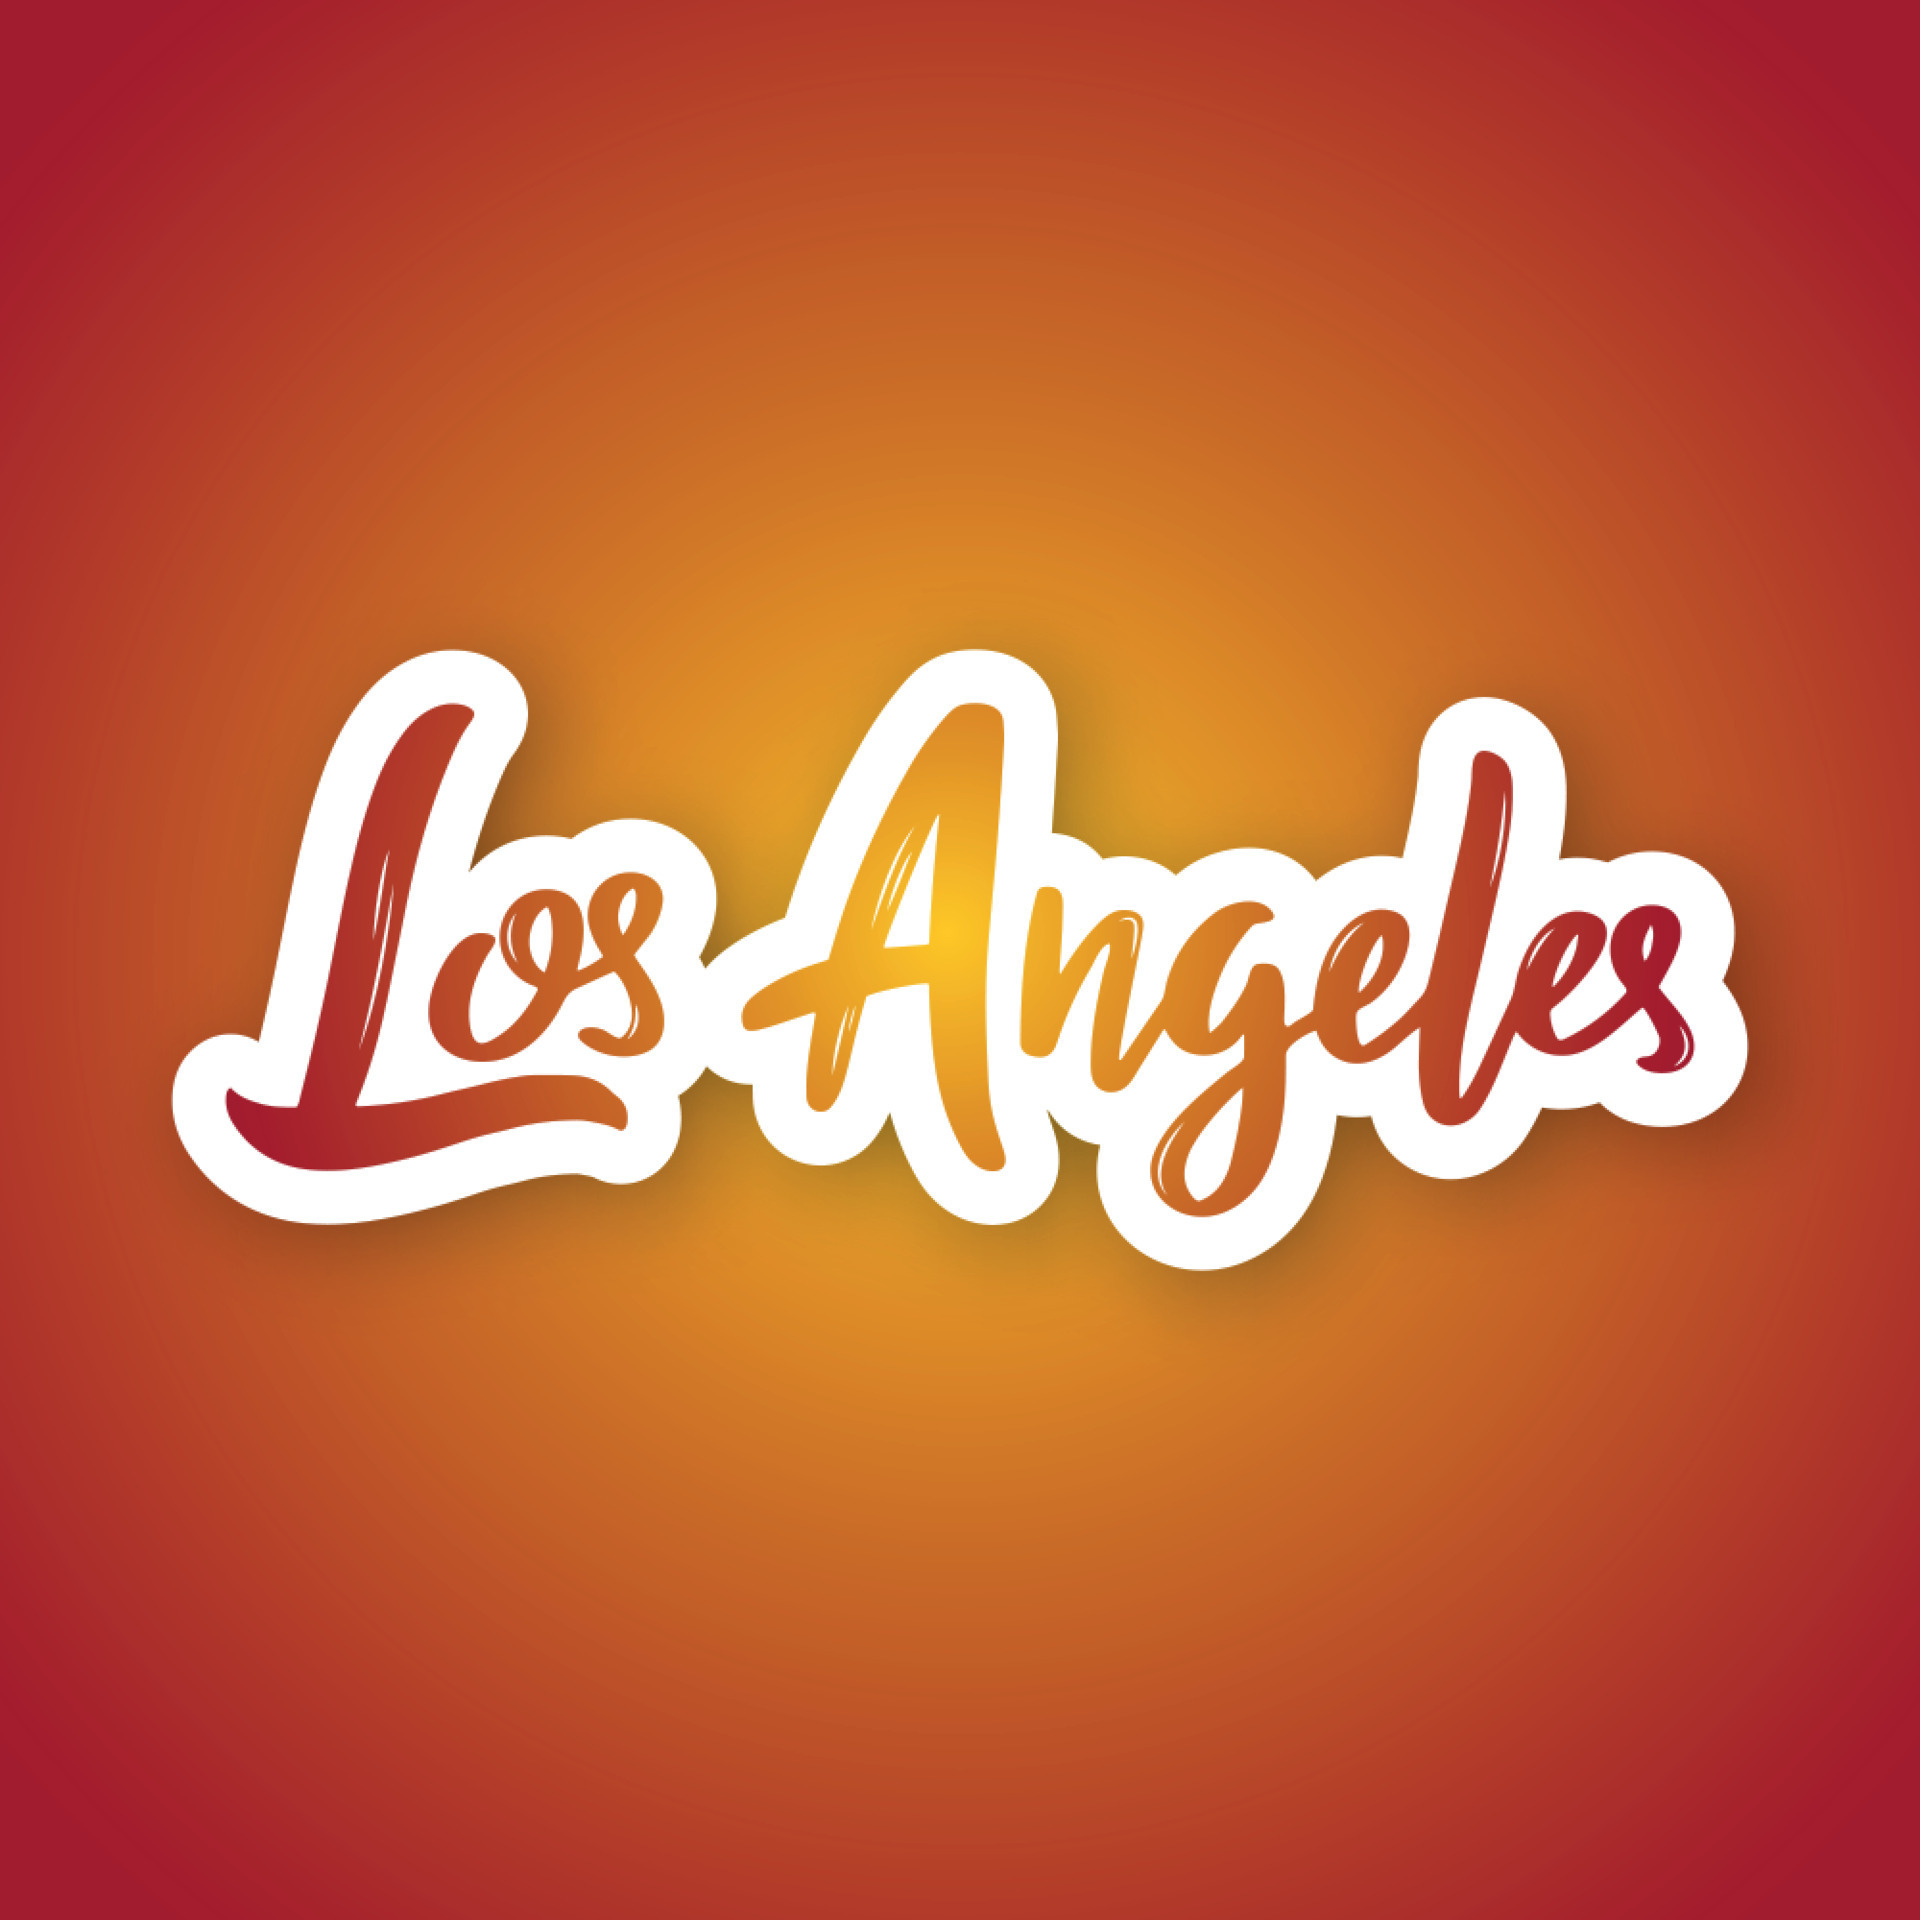 Los Angeles - handwritten name of the US city. Sticker with